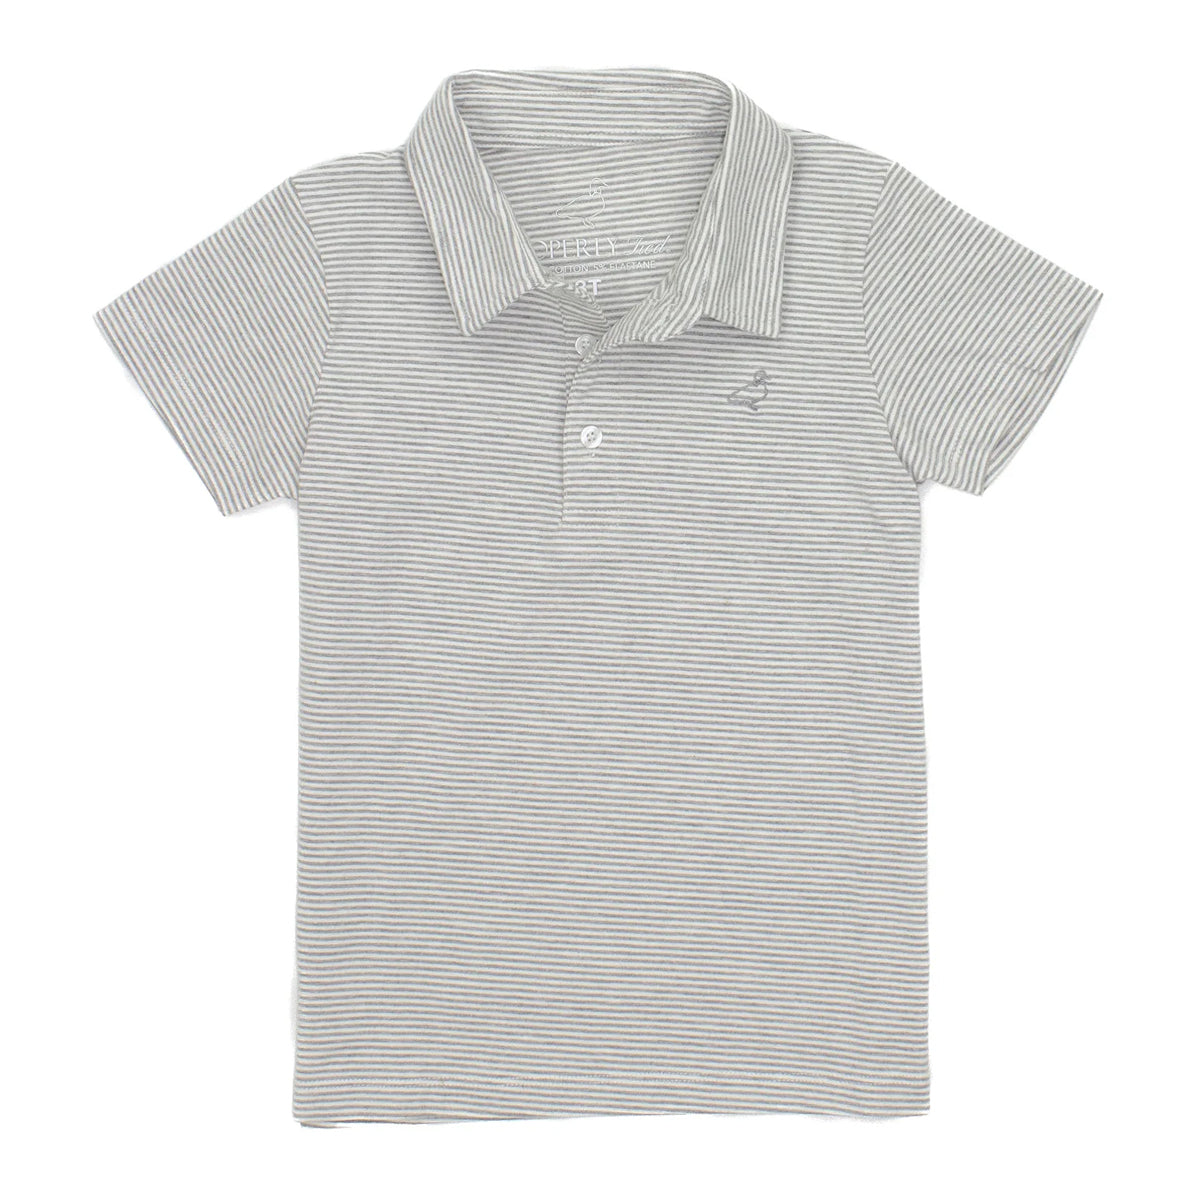 Toddler Boy's Light Grey Striped Polo Shirt by Properly Tied